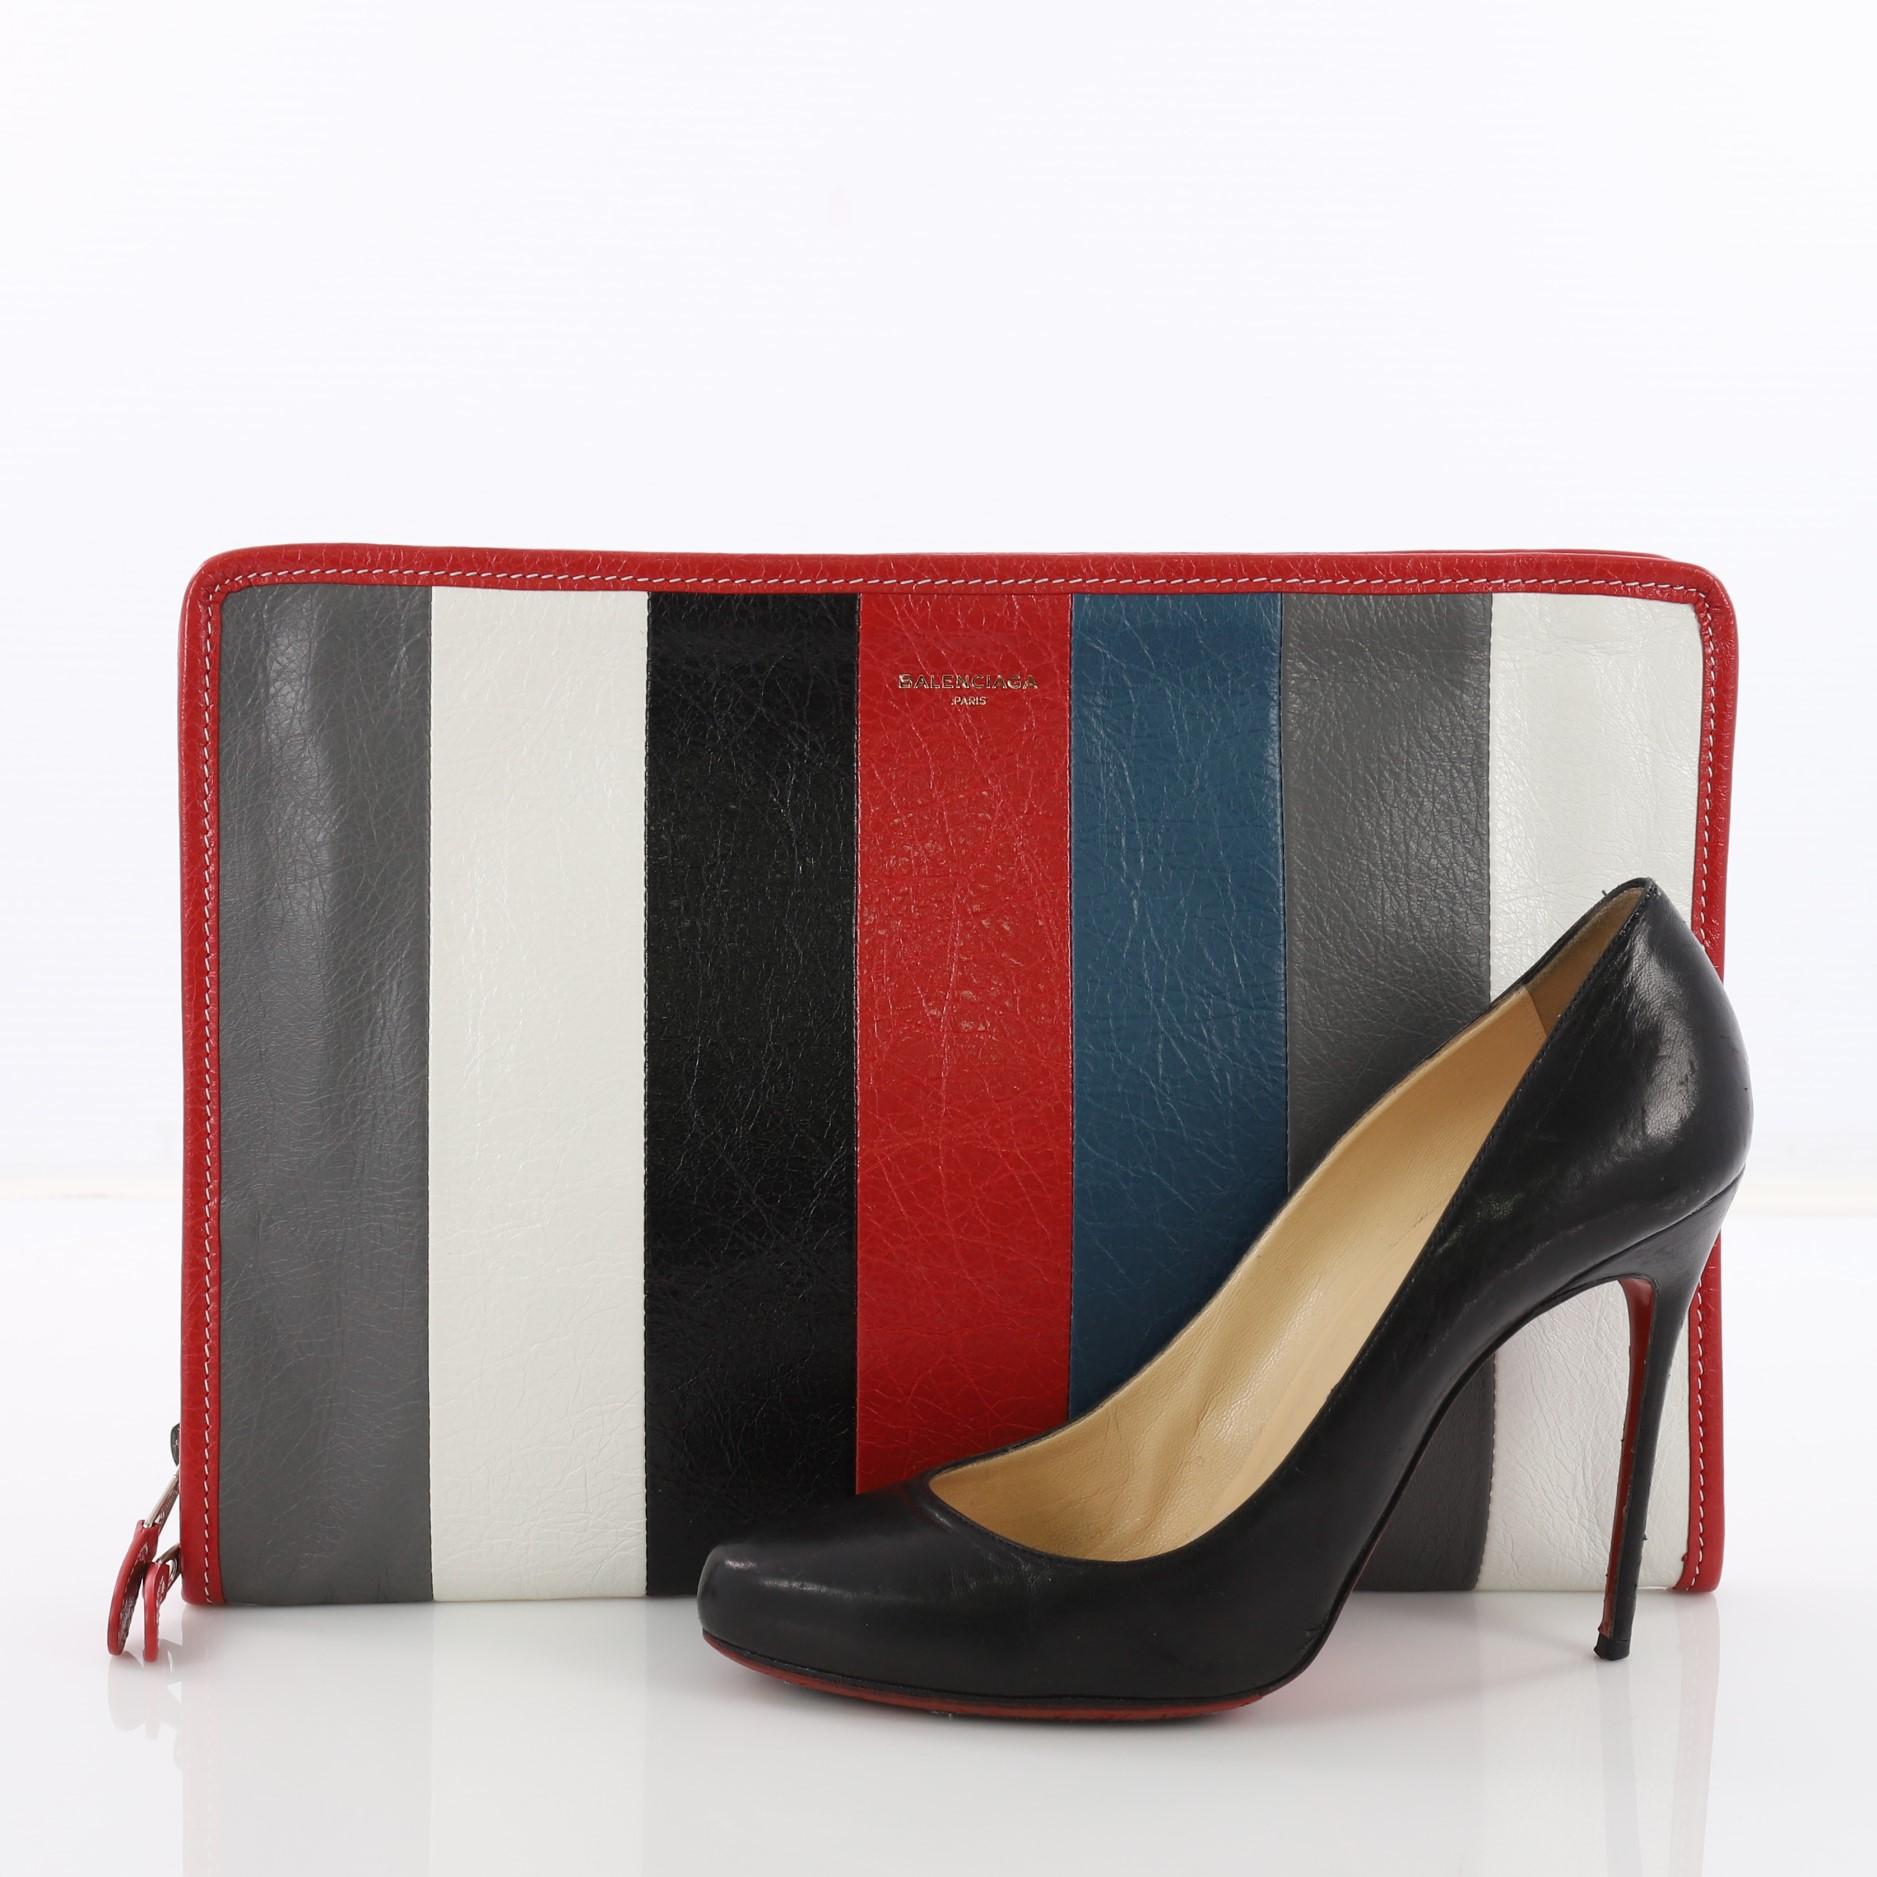 This Balenciaga Bazar Pouch Striped Leather, crafted from red multicolor striped leather, features red leather trimsa nd silver-tone hardware. Its zip closure opens to a black fabric interior with slip pocket. **Note: Shoe photographed is used as a